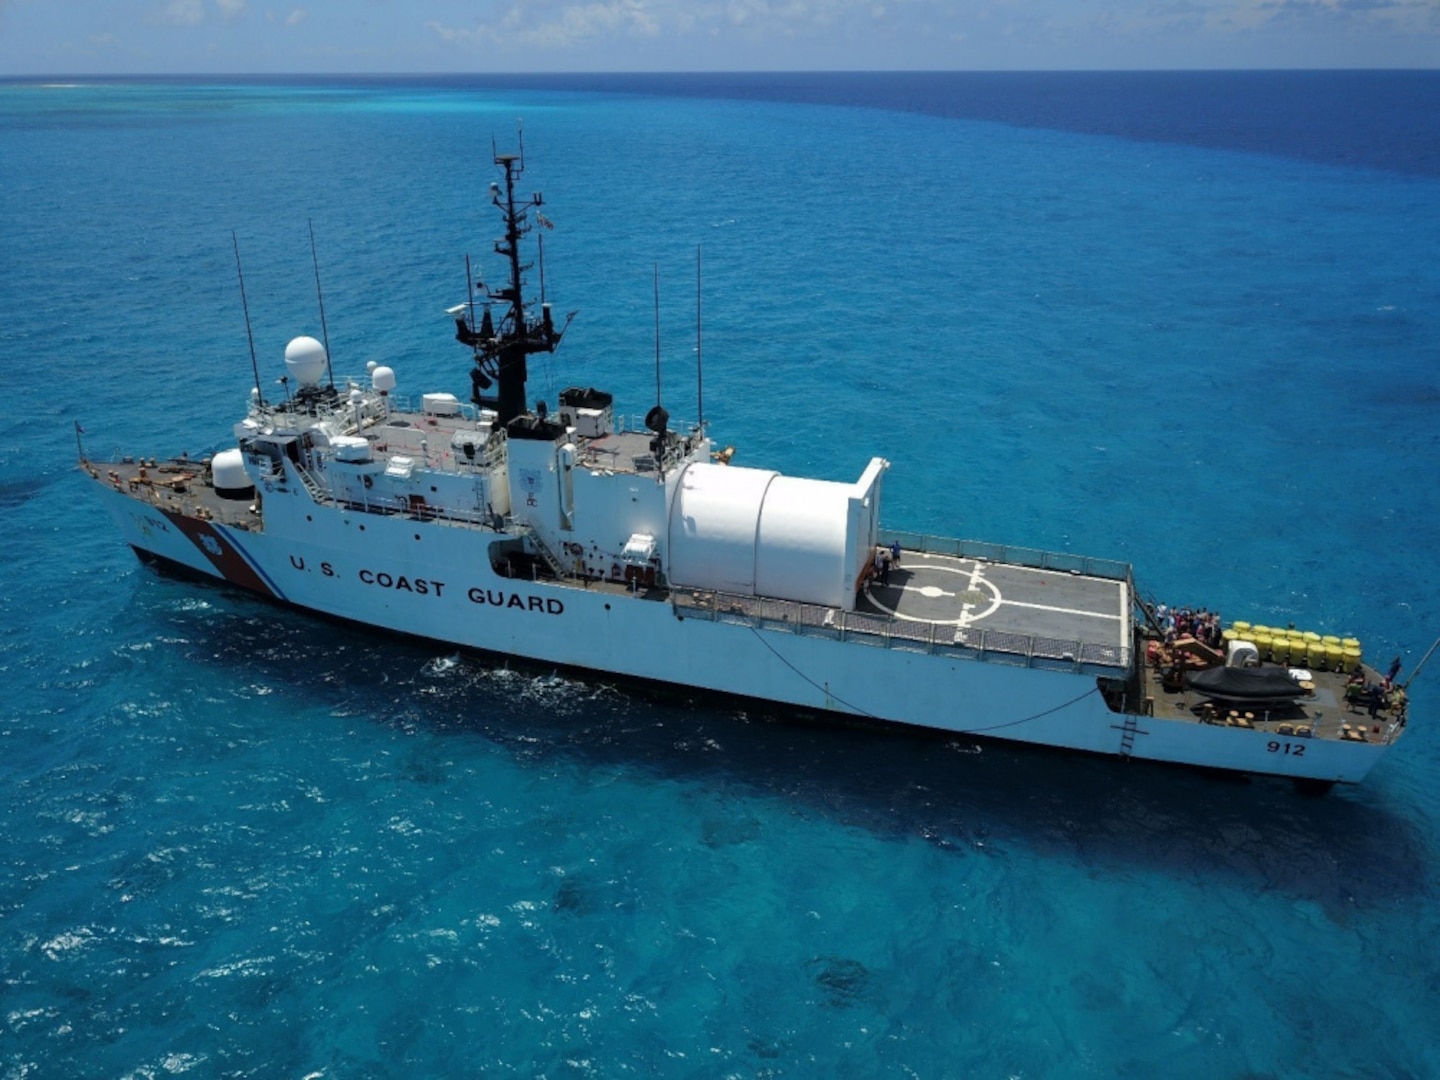 Coast Guard Cutter Legare (WMEC 912) patrols in the Caribbean in April 2021. The cutter was deployed in support of Operation Unified Resolve/Martillo under the tactical control of Joint Interagency Task Force South (JIATF-S) and the Seventh Coast Guard District.